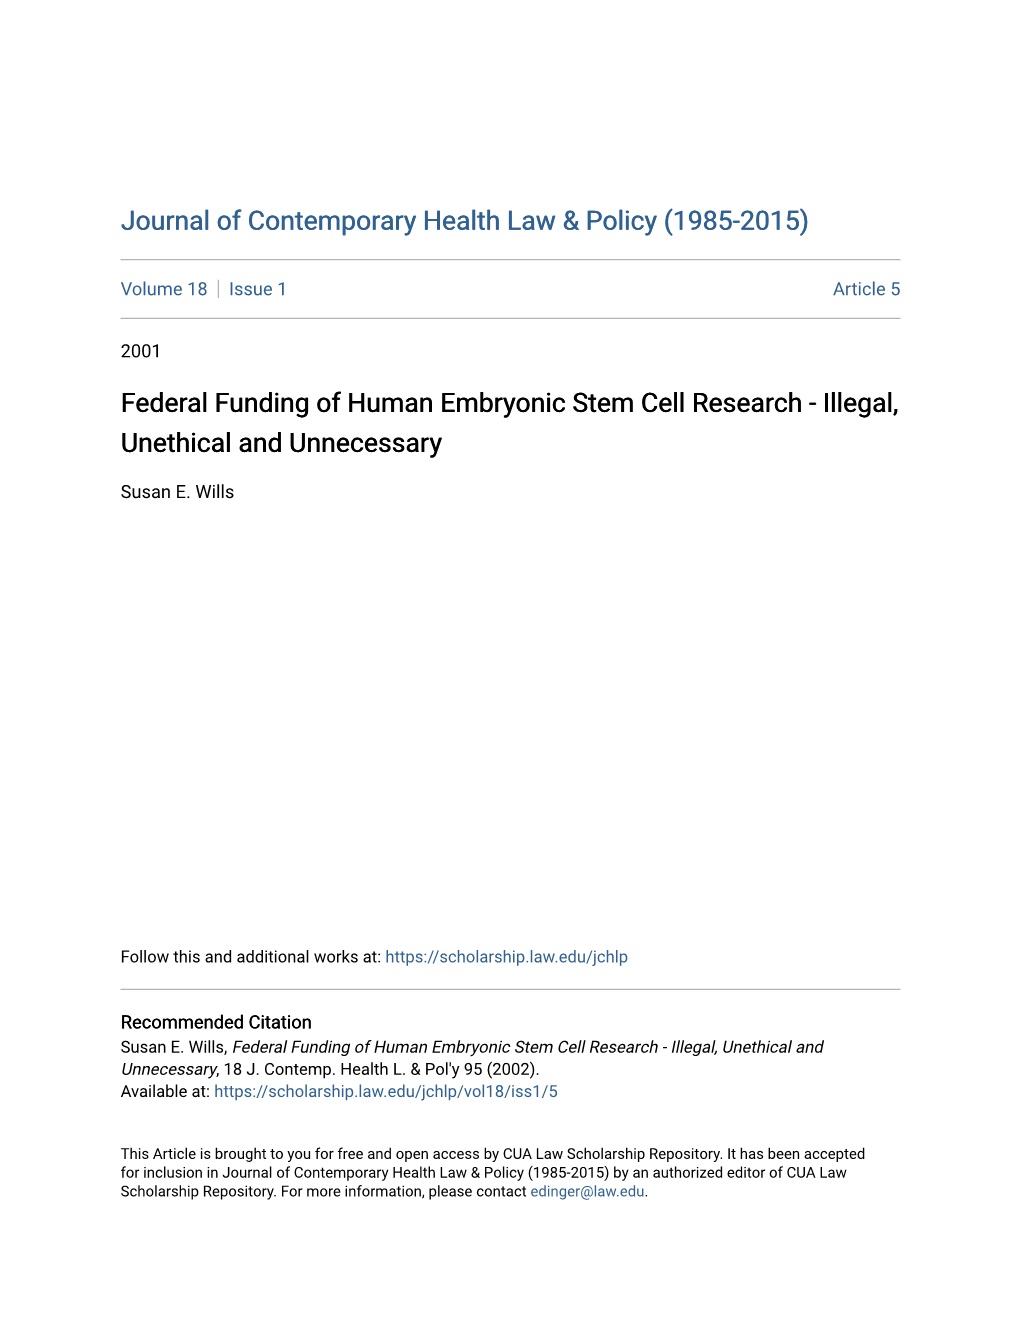 Federal Funding of Human Embryonic Stem Cell Research - Illegal, Unethical and Unnecessary